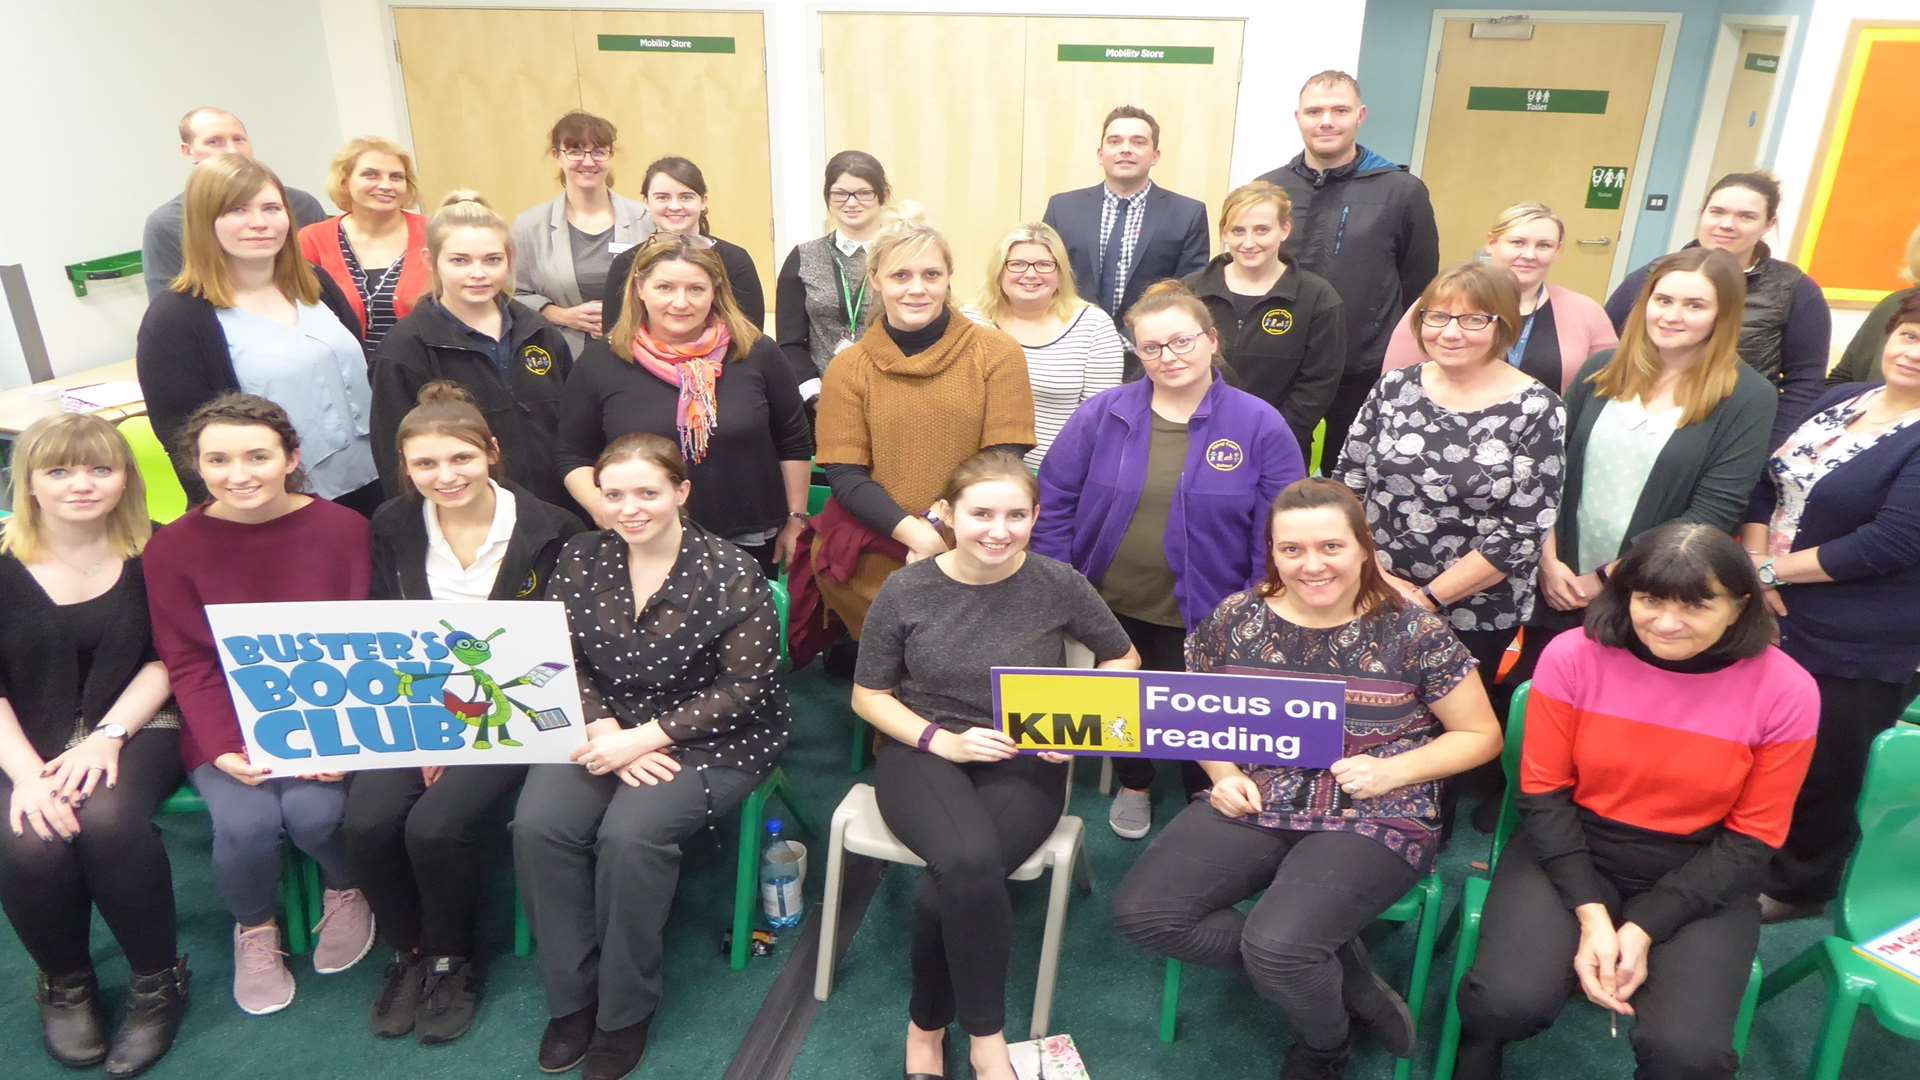 A training session was staged by the KM Charity Team at Abbey Court School, Strood - along with five other venues across the county - to brief literacy leaders in the region on how to make a success of Buster's Book Club.